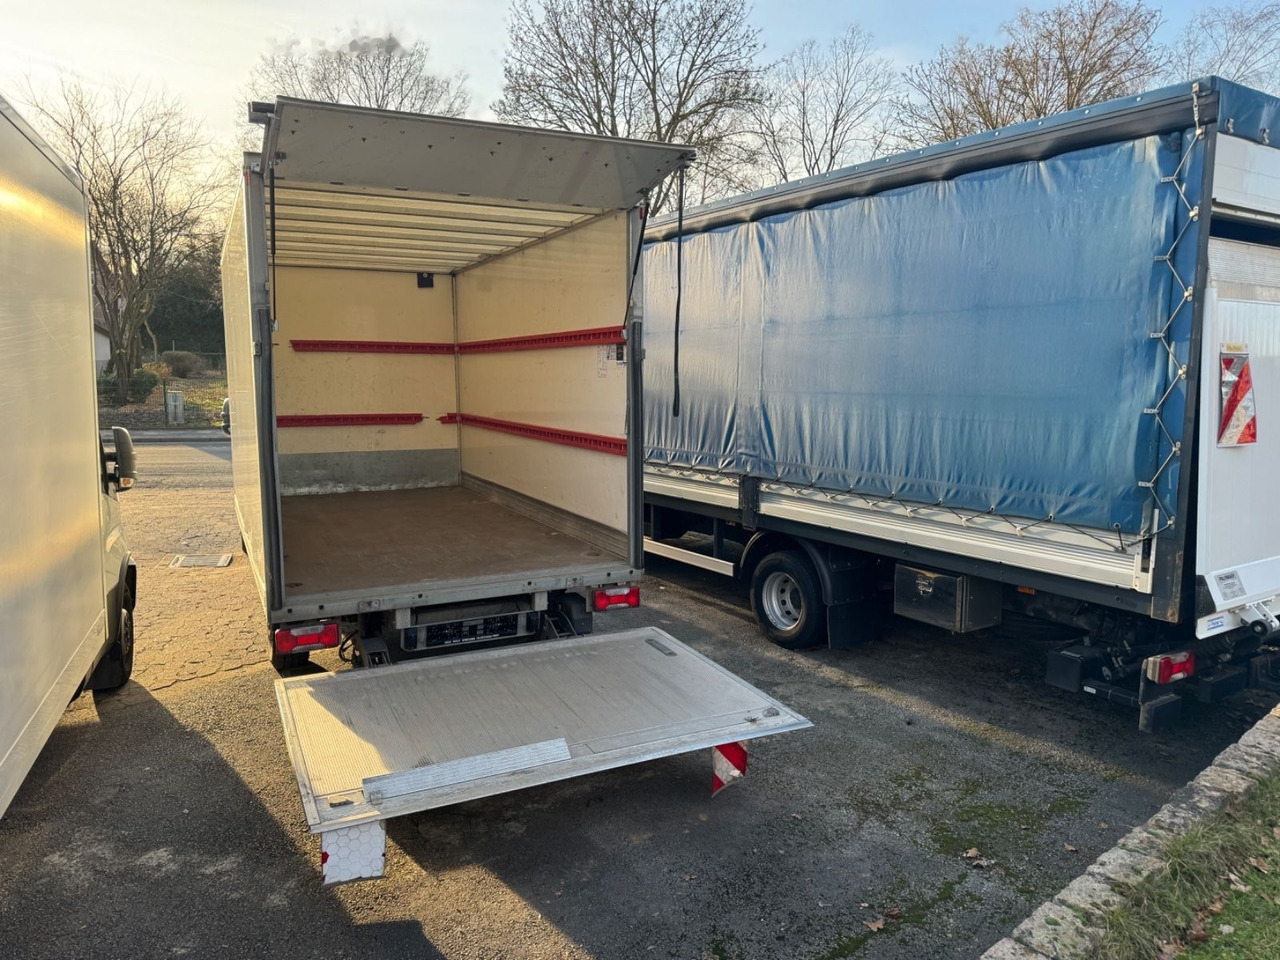 Koffer Transporter IVECO Daily 35-160 Koffer + Tail Lift